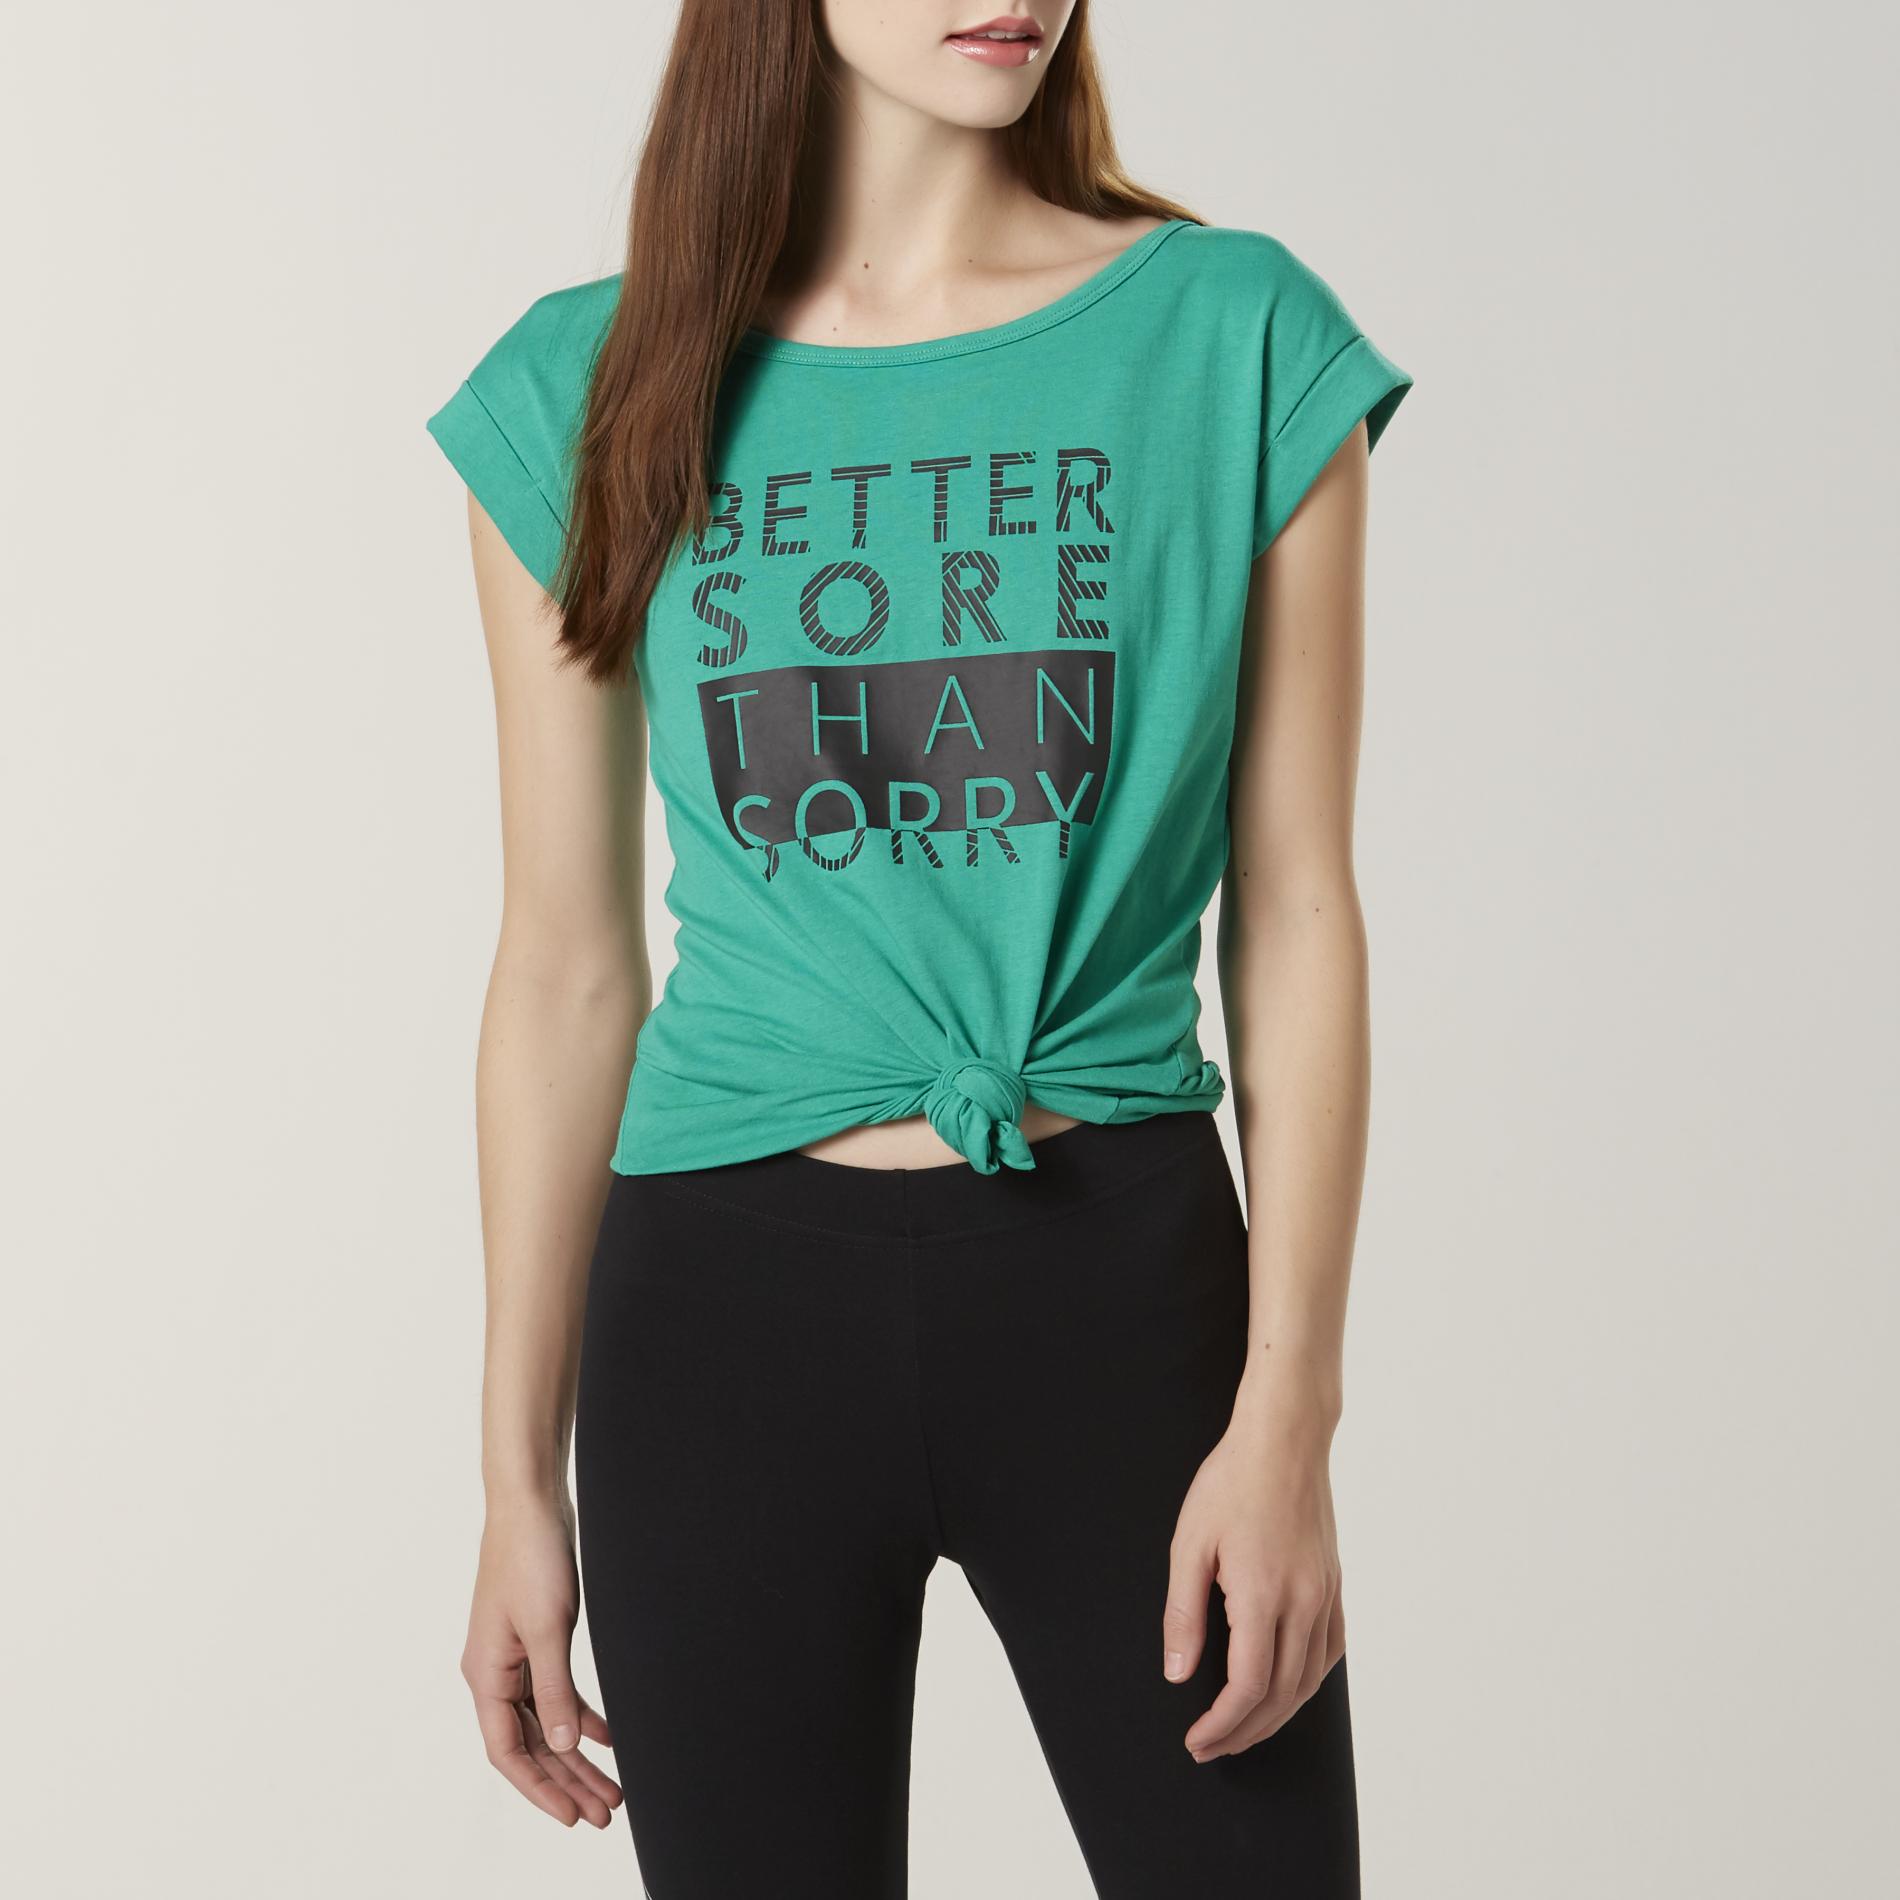 Athletech Women's Athletic T-Shirt - Better Sore Than Sorry